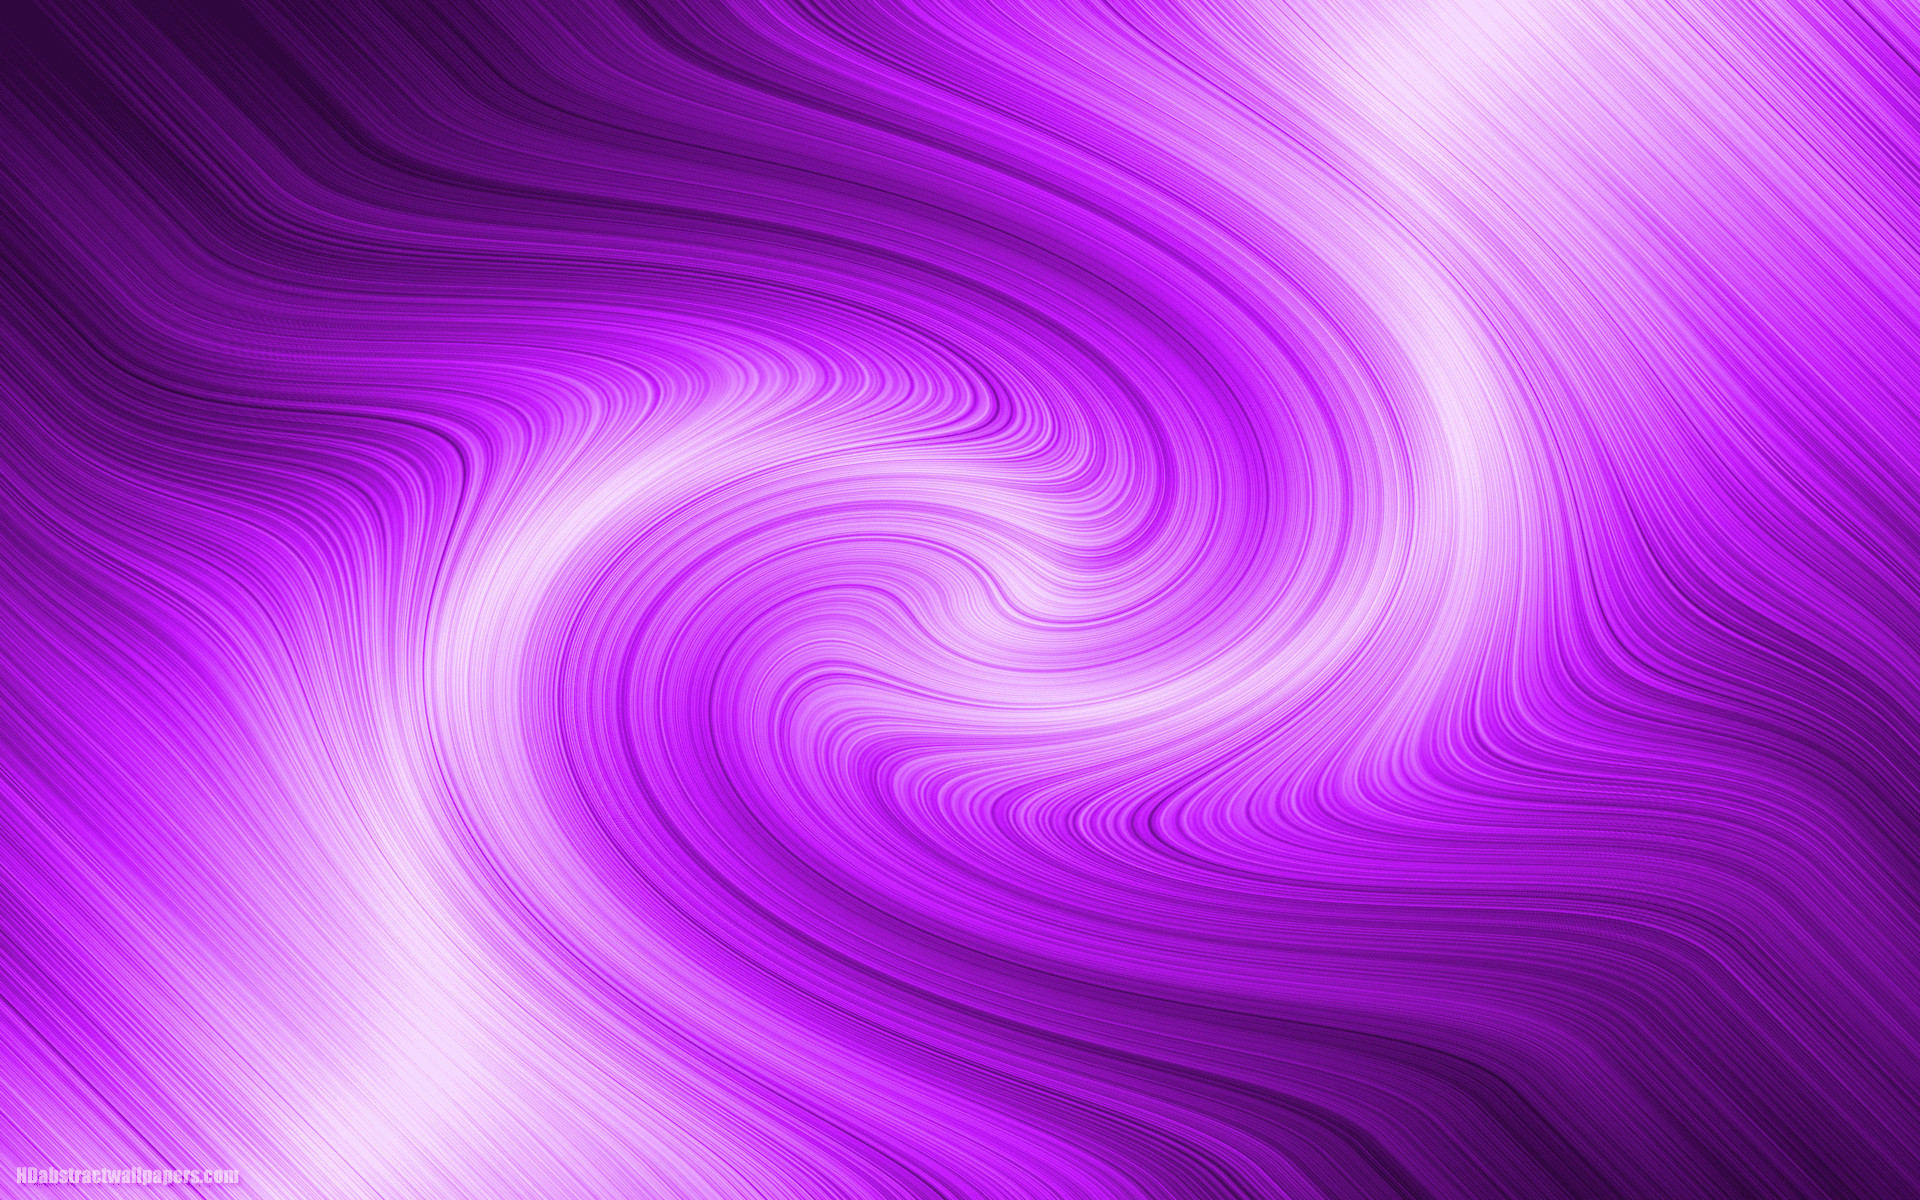 1920x1200  Beautiful abstract wallpaper purple with bright lights. A nice  purple background for your desktop or on Facebook or Twitter.